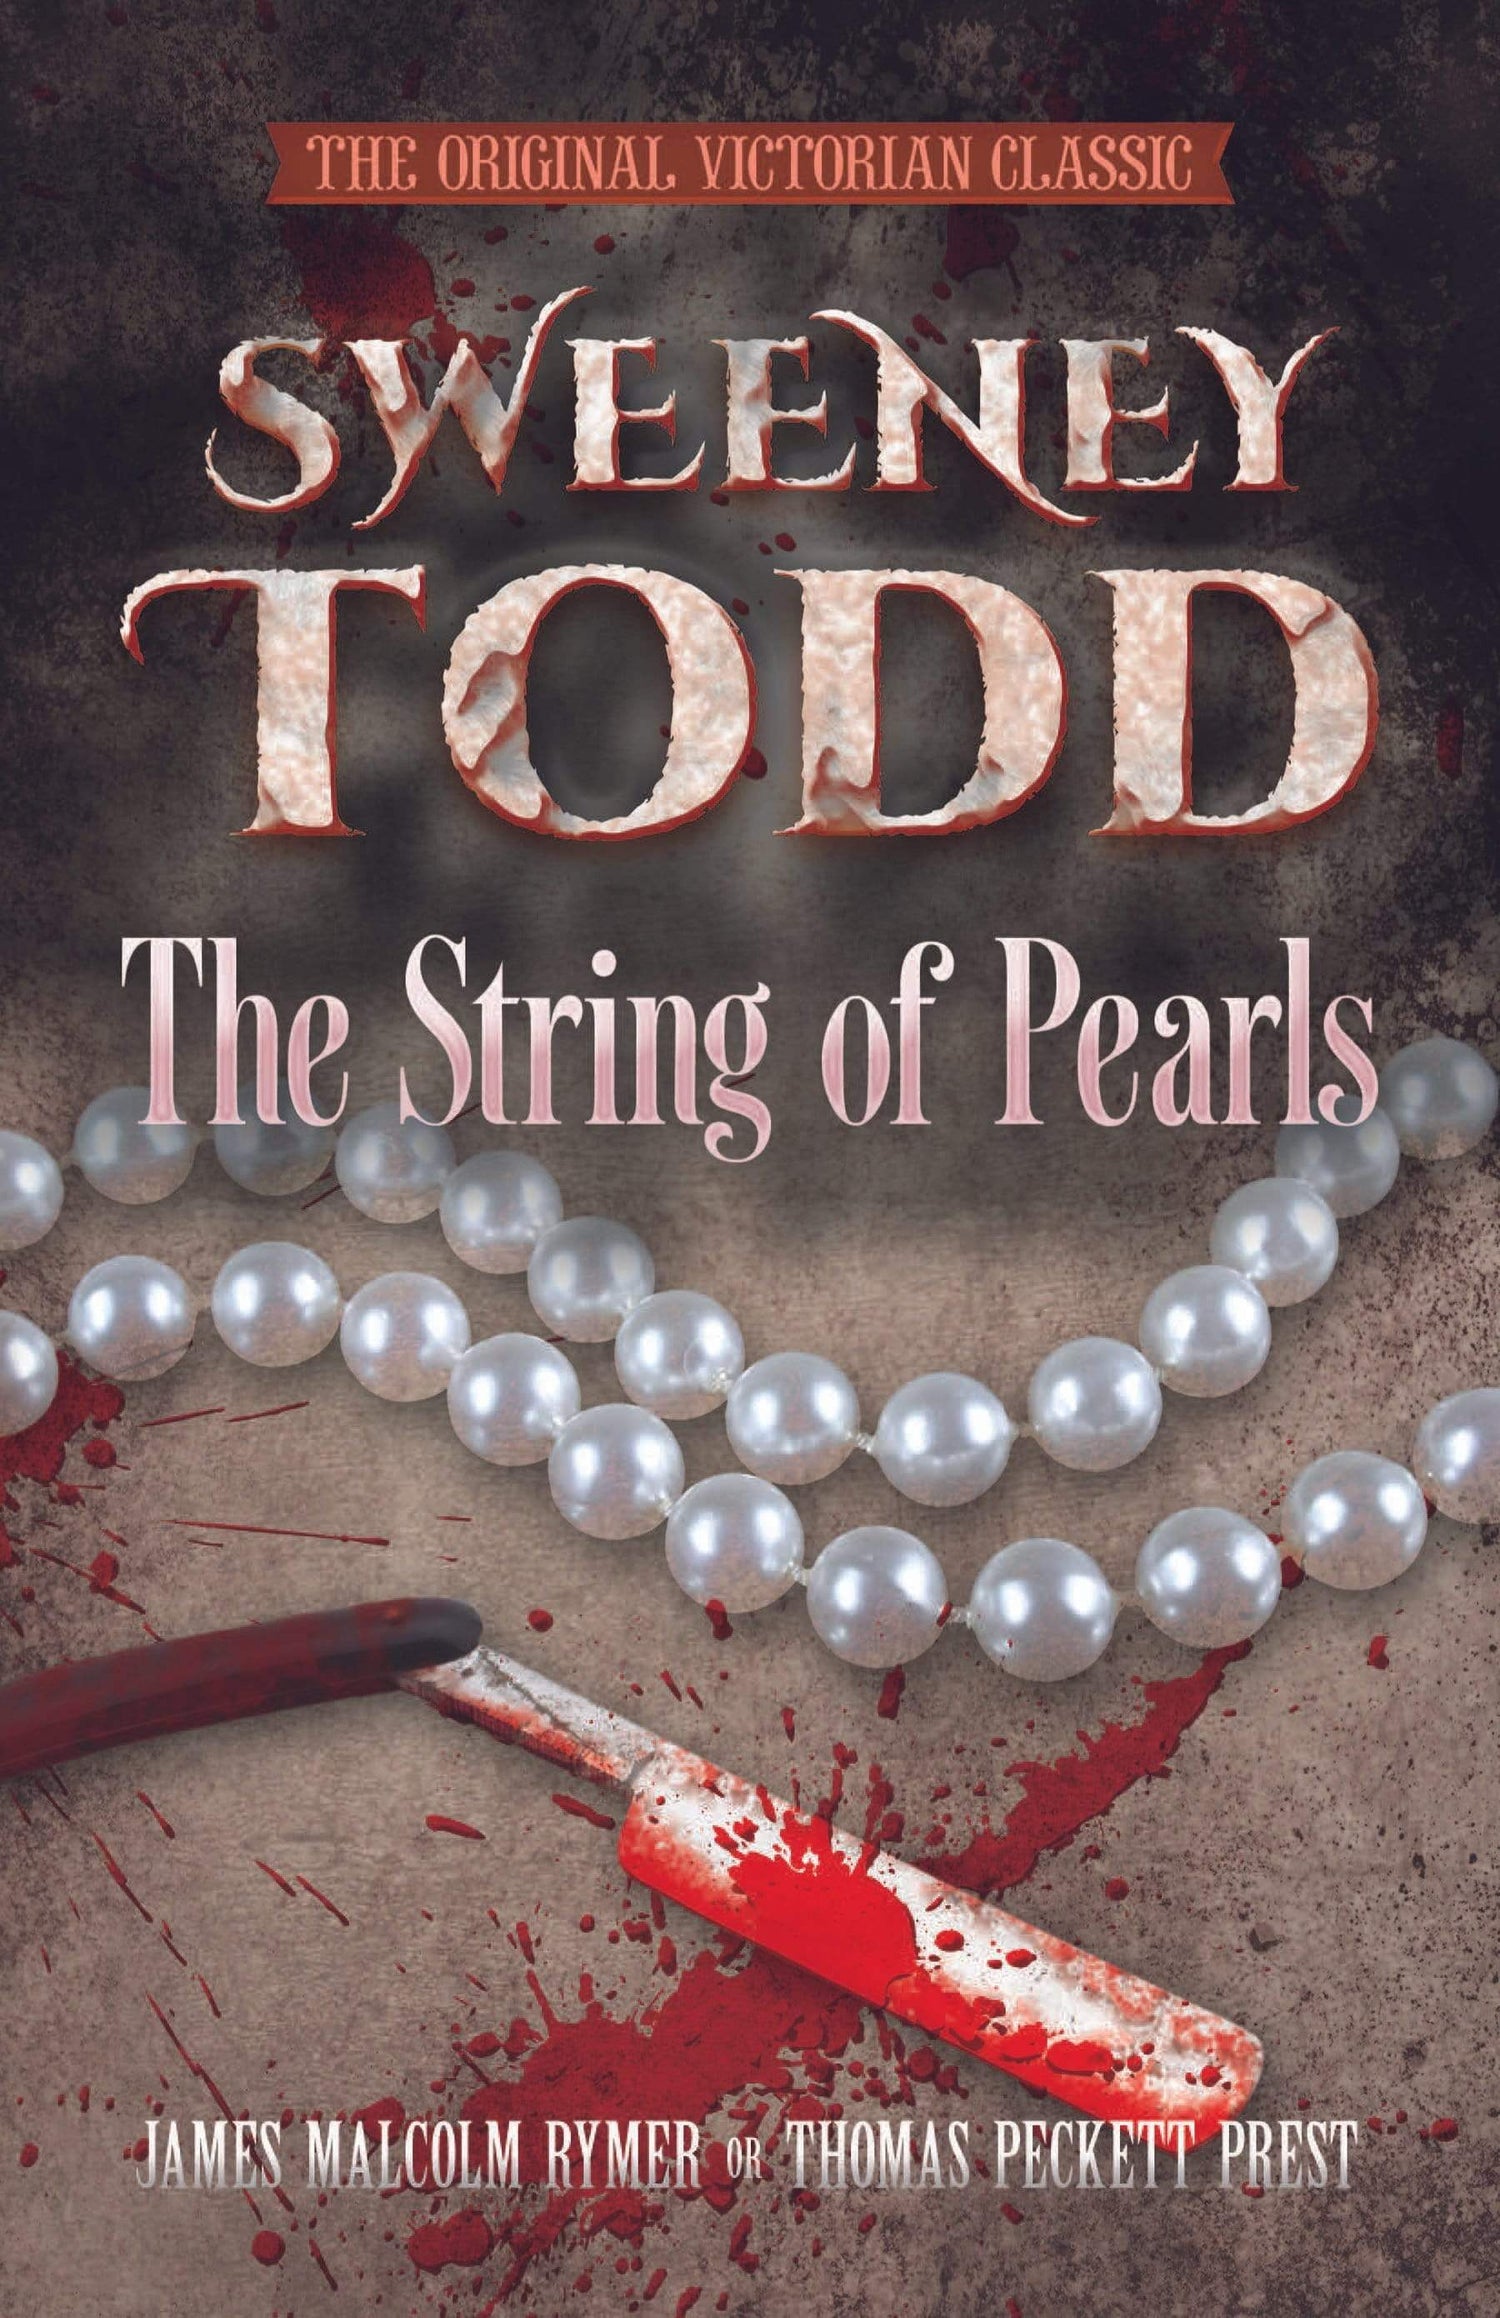 Sweeney Todd -- The String Of Pearls: The Original Victorian Classic